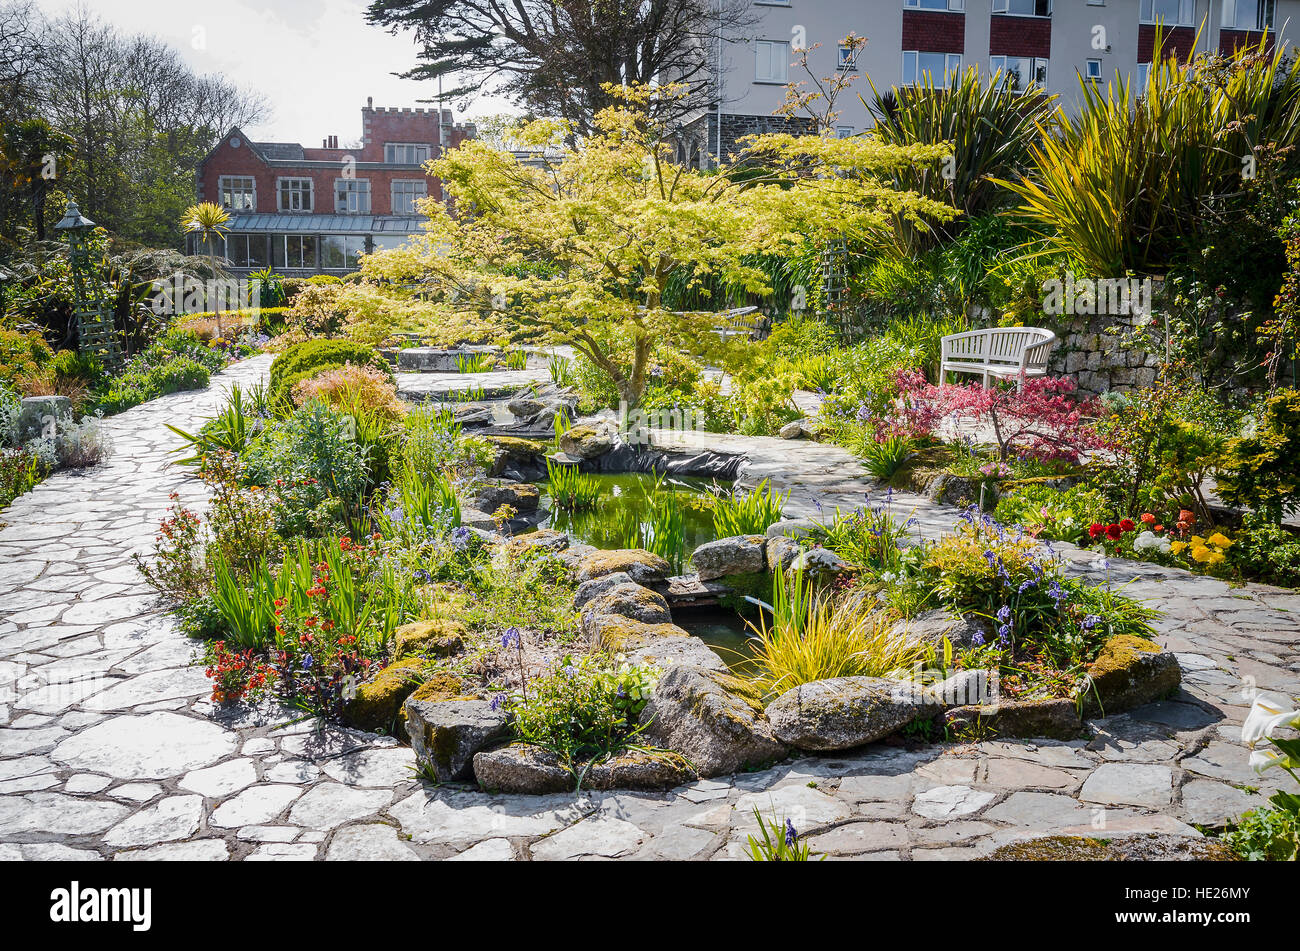 Ornamental water garden at the Meudon hotel in Cornwall UK Stock Photo